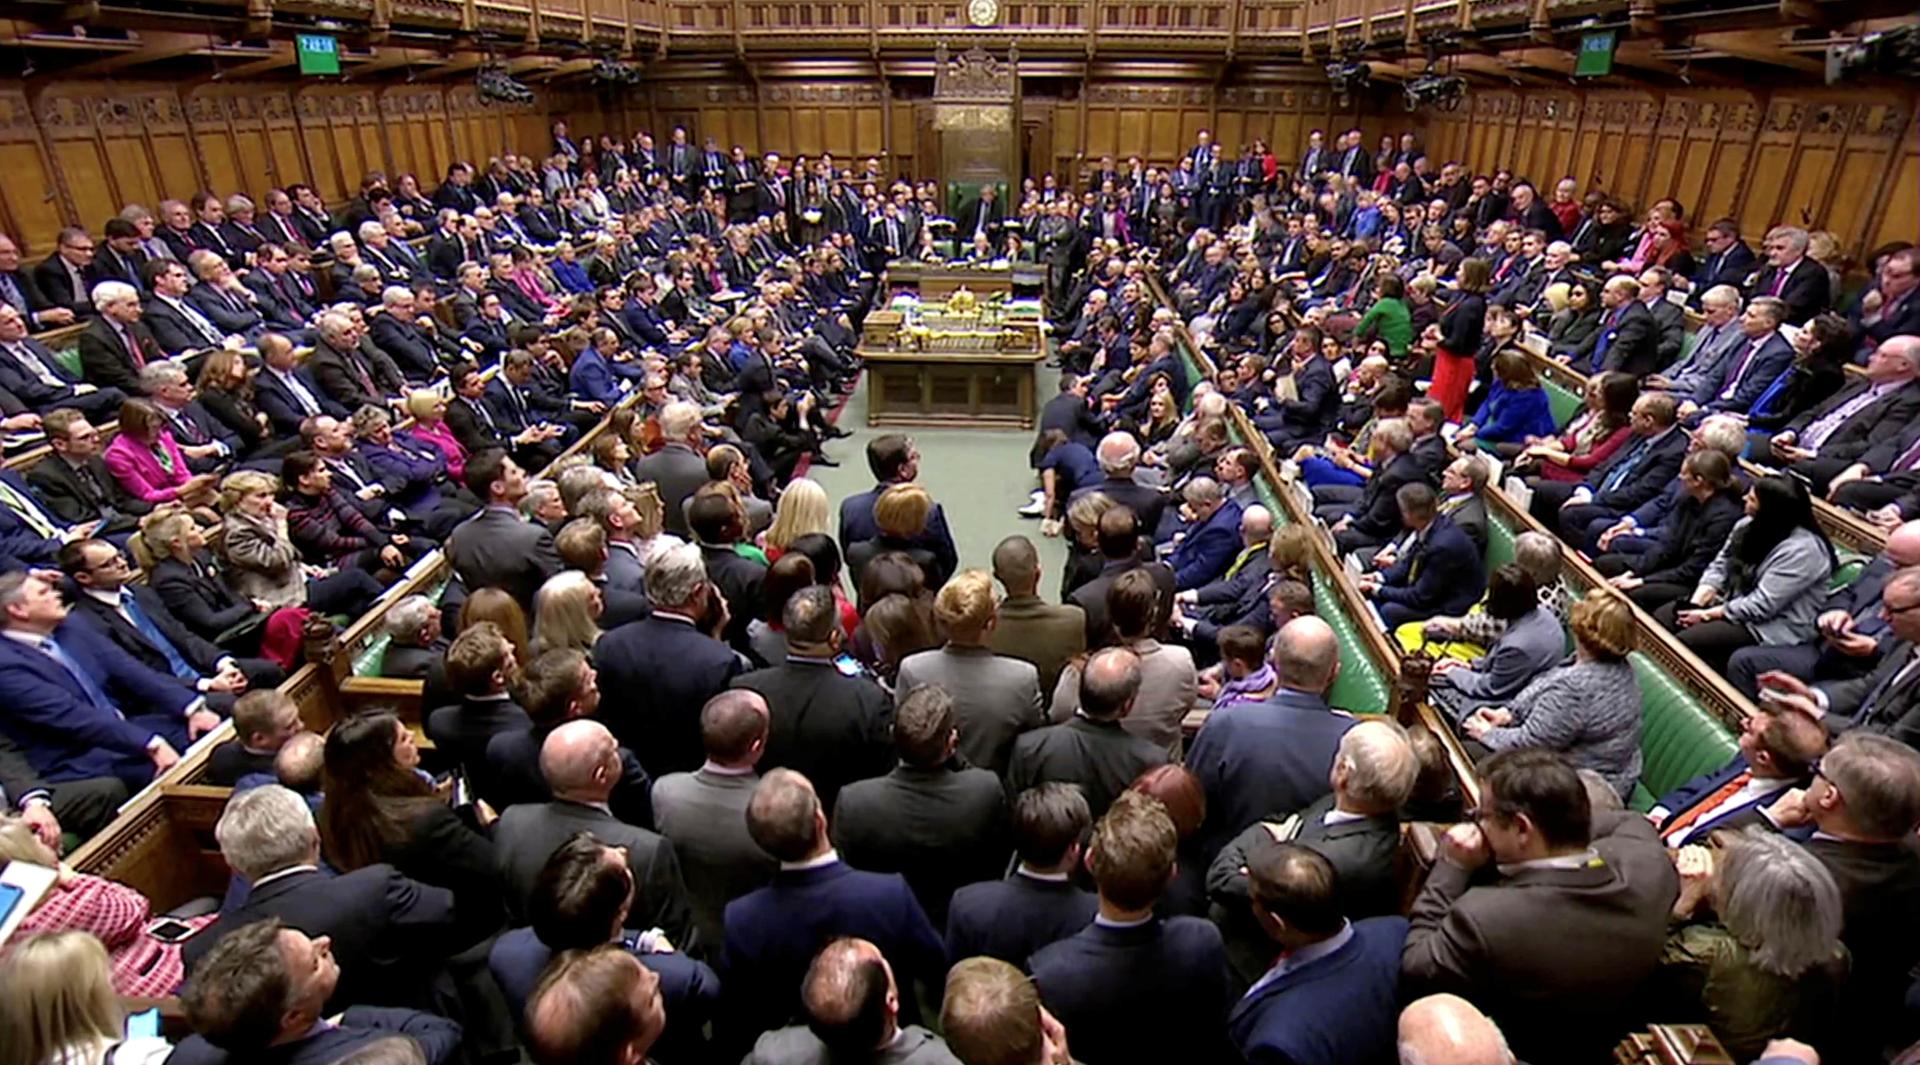 several hundred members of parliament in a room 